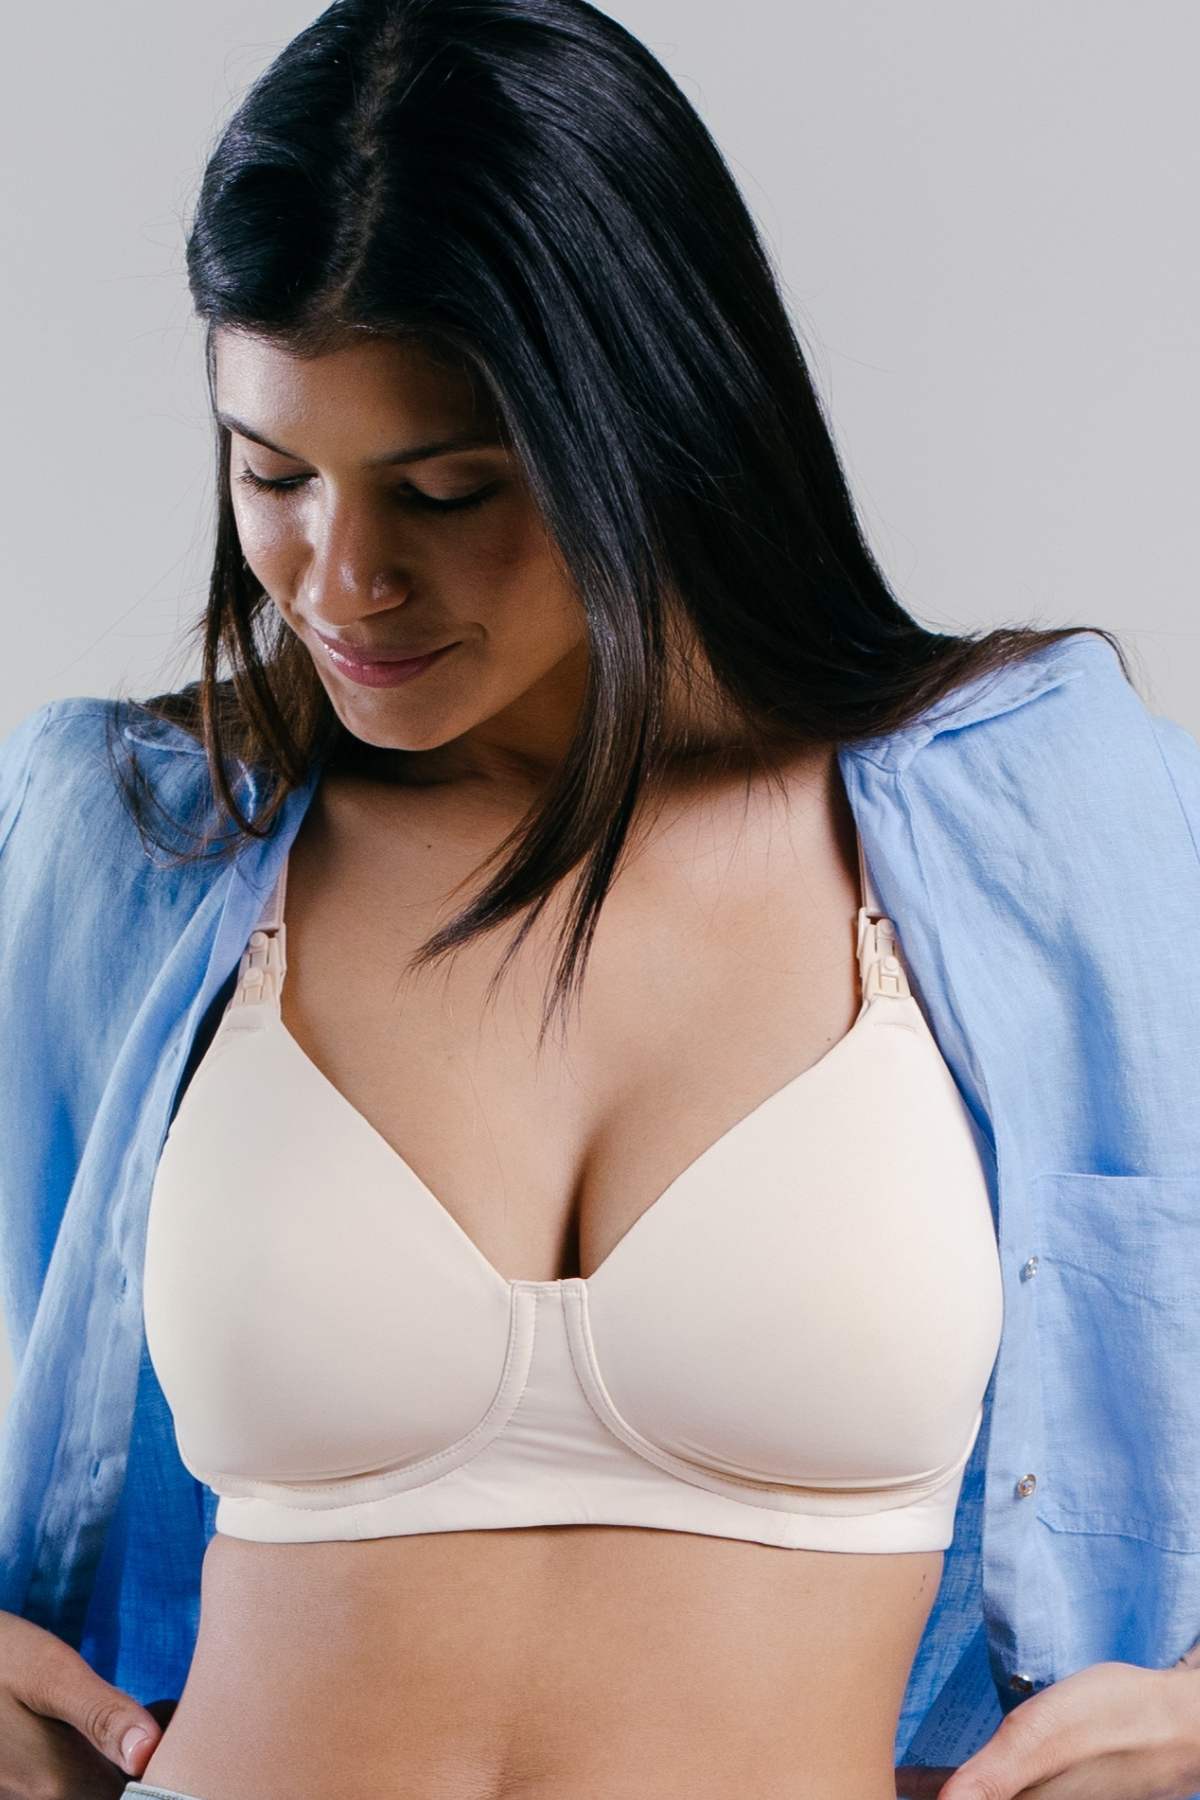 Lansinoh Simple Wishes Hands Free Pumping Bra XS To L Neutral Pink – ASA  College: Florida